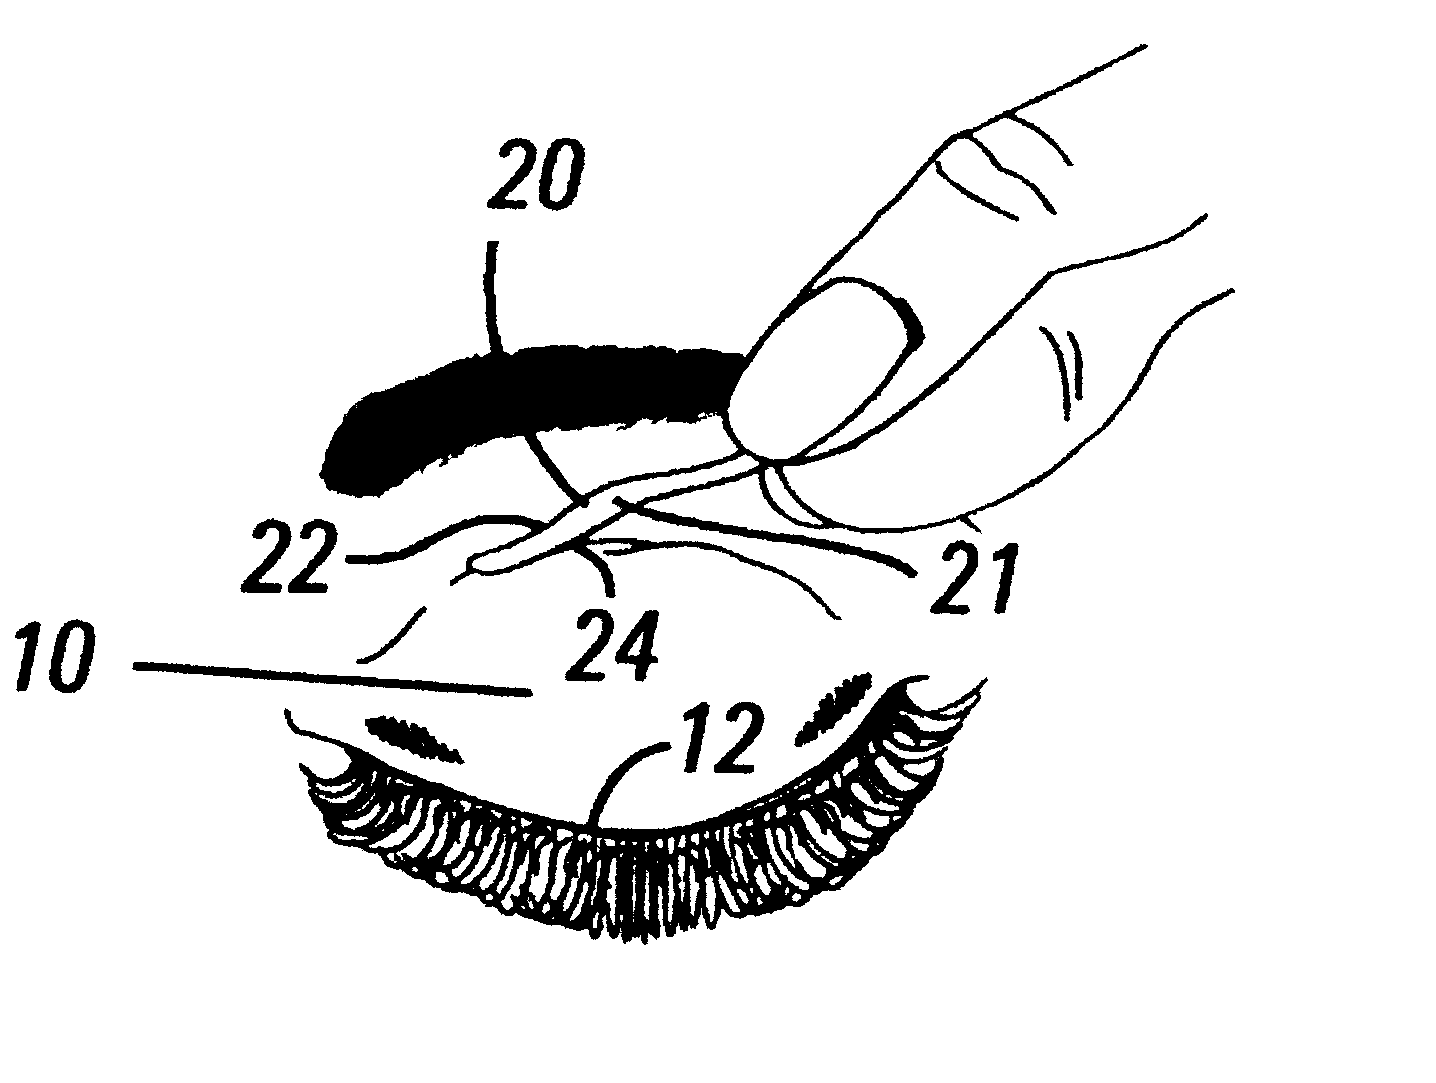 System for reducing eyelid droop